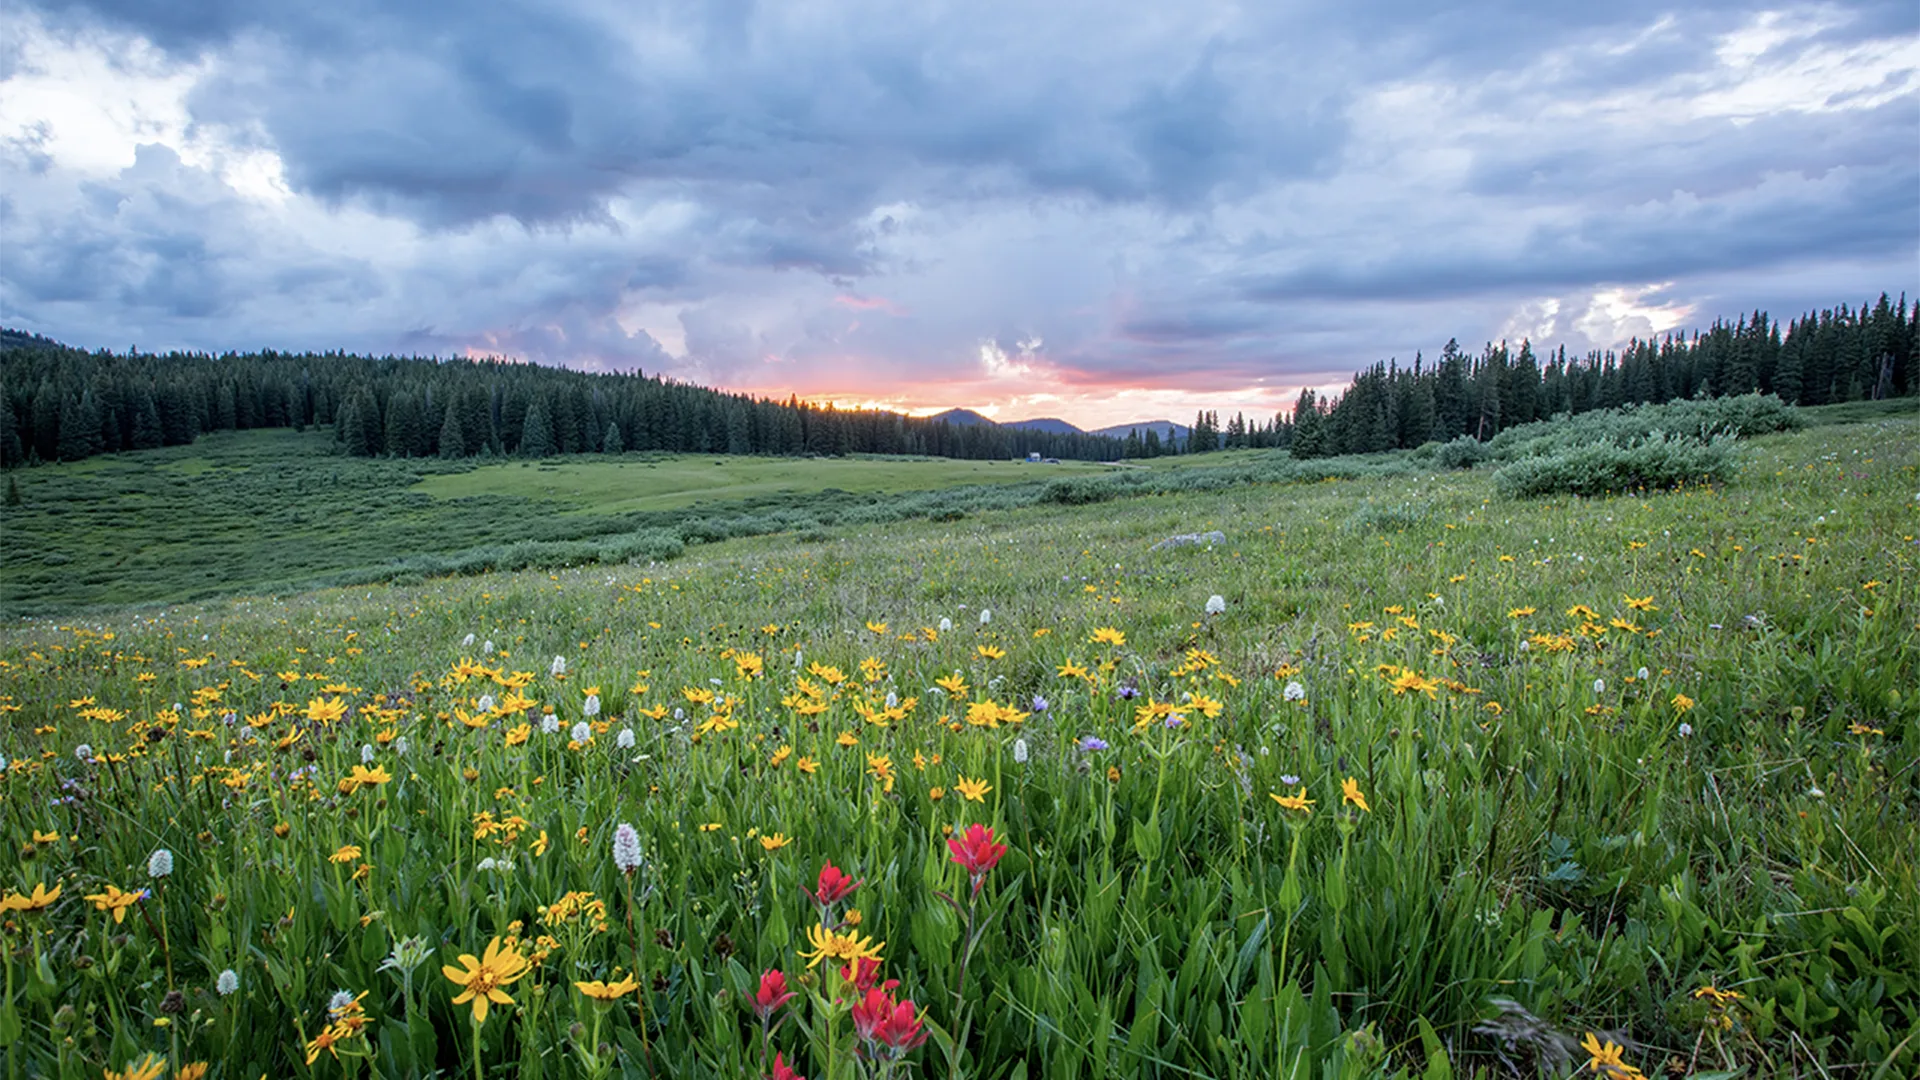 Flowers in a meadow with trees and mountains